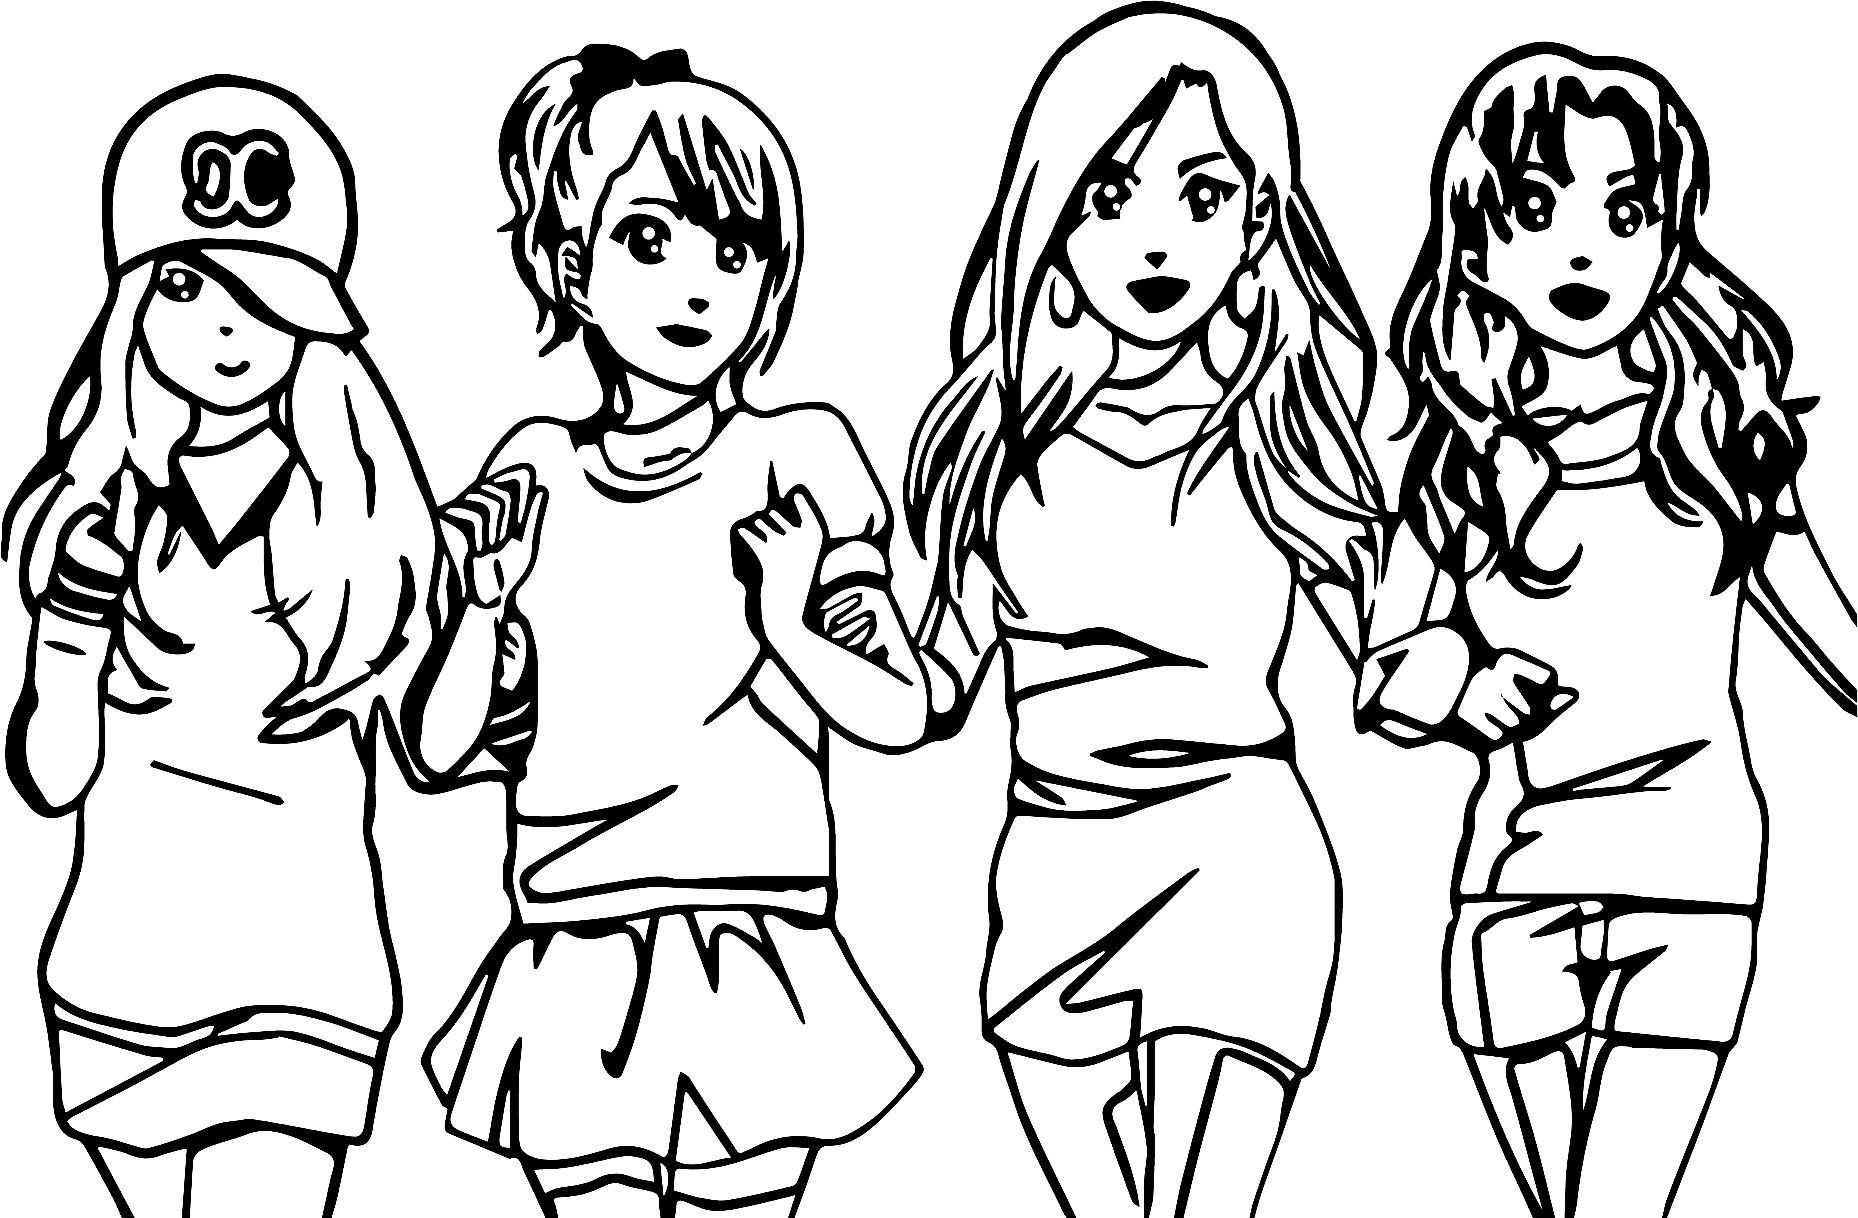 BFF Coloring Pages   Coloring Pages For Kids And Adults